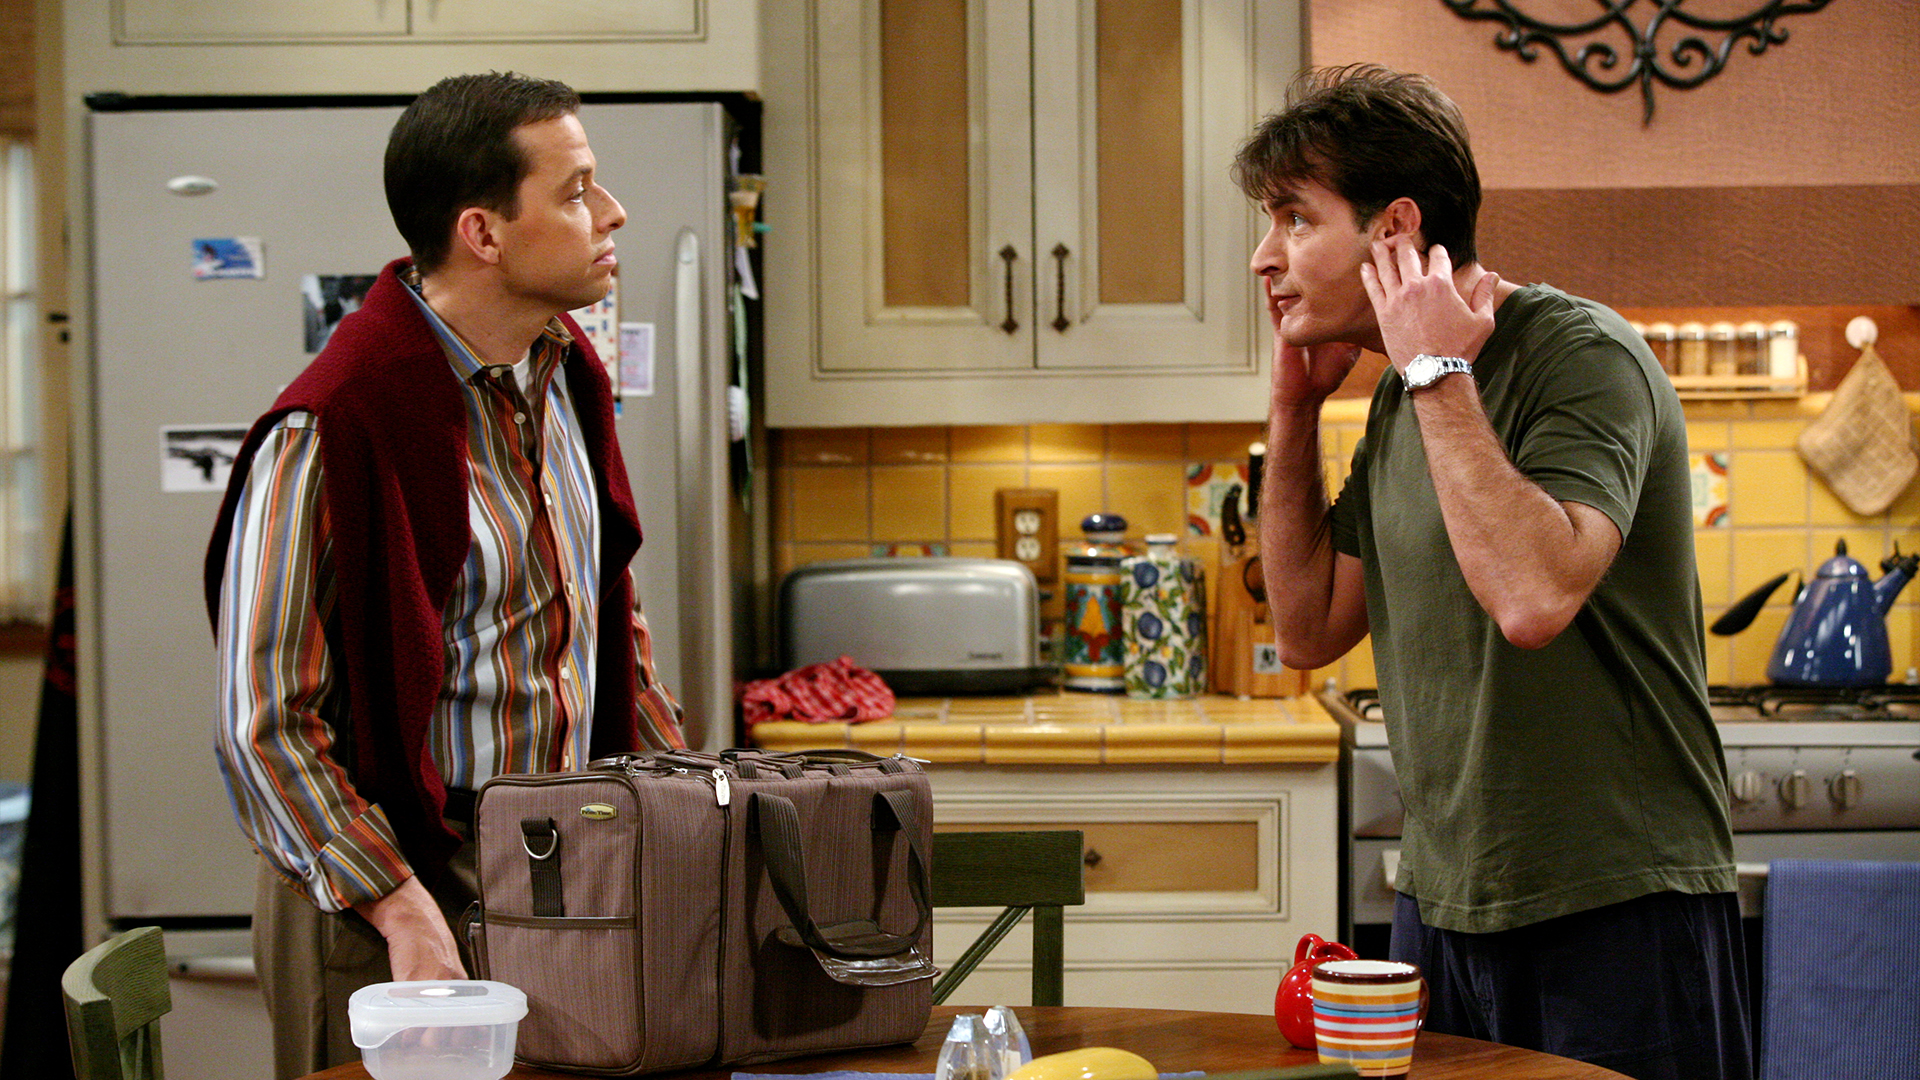 Two and a Half Men Season 5 Episode 3 - Dum Diddy Dum Diddy Doo